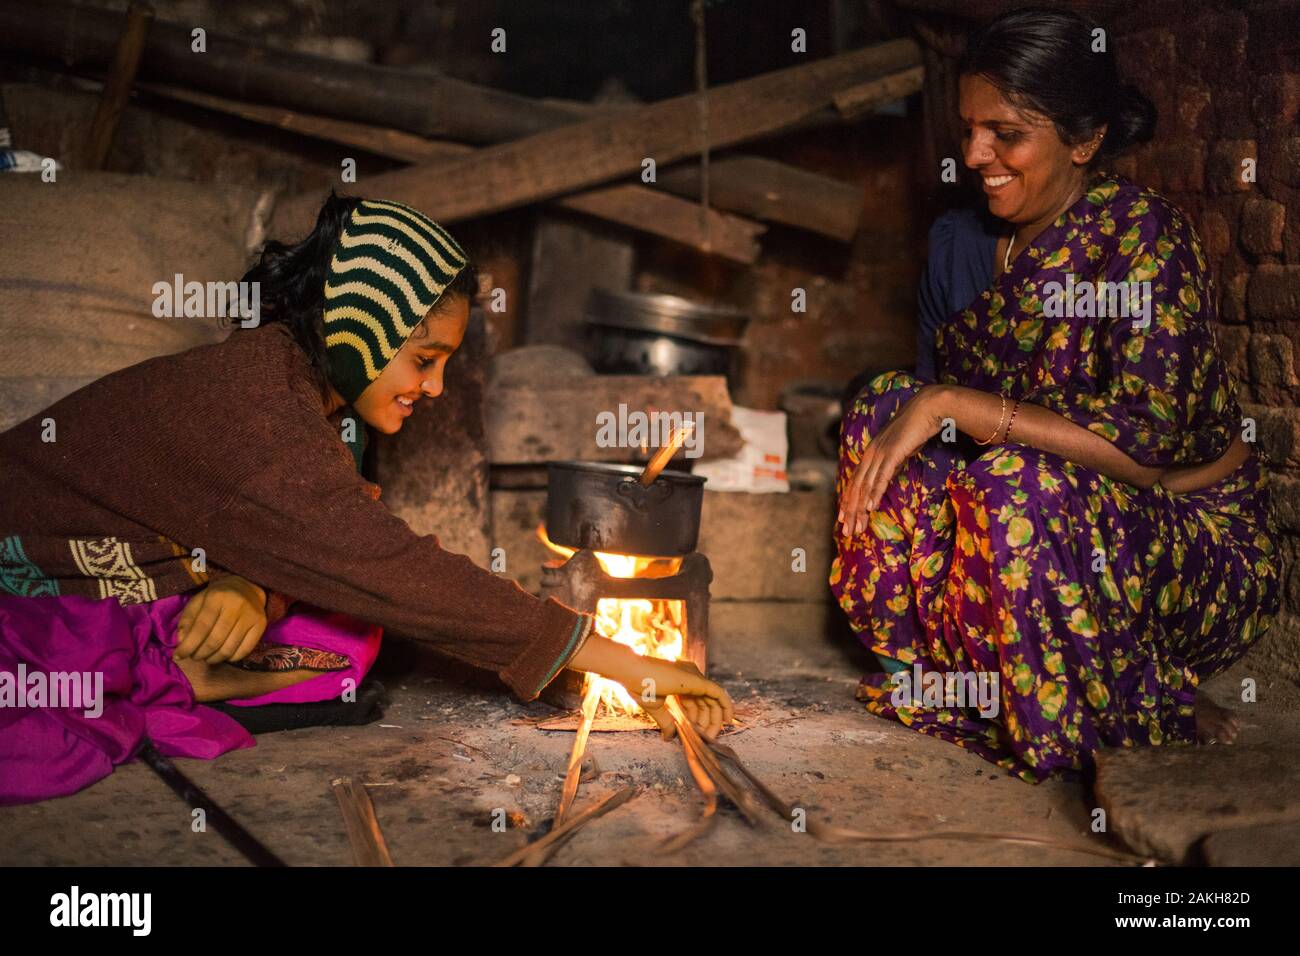 CAPTION: Sheela has a small business making food and drinks for local schoolchildren. Through this, she is able to support her daughter Nandini, who h Stock Photo